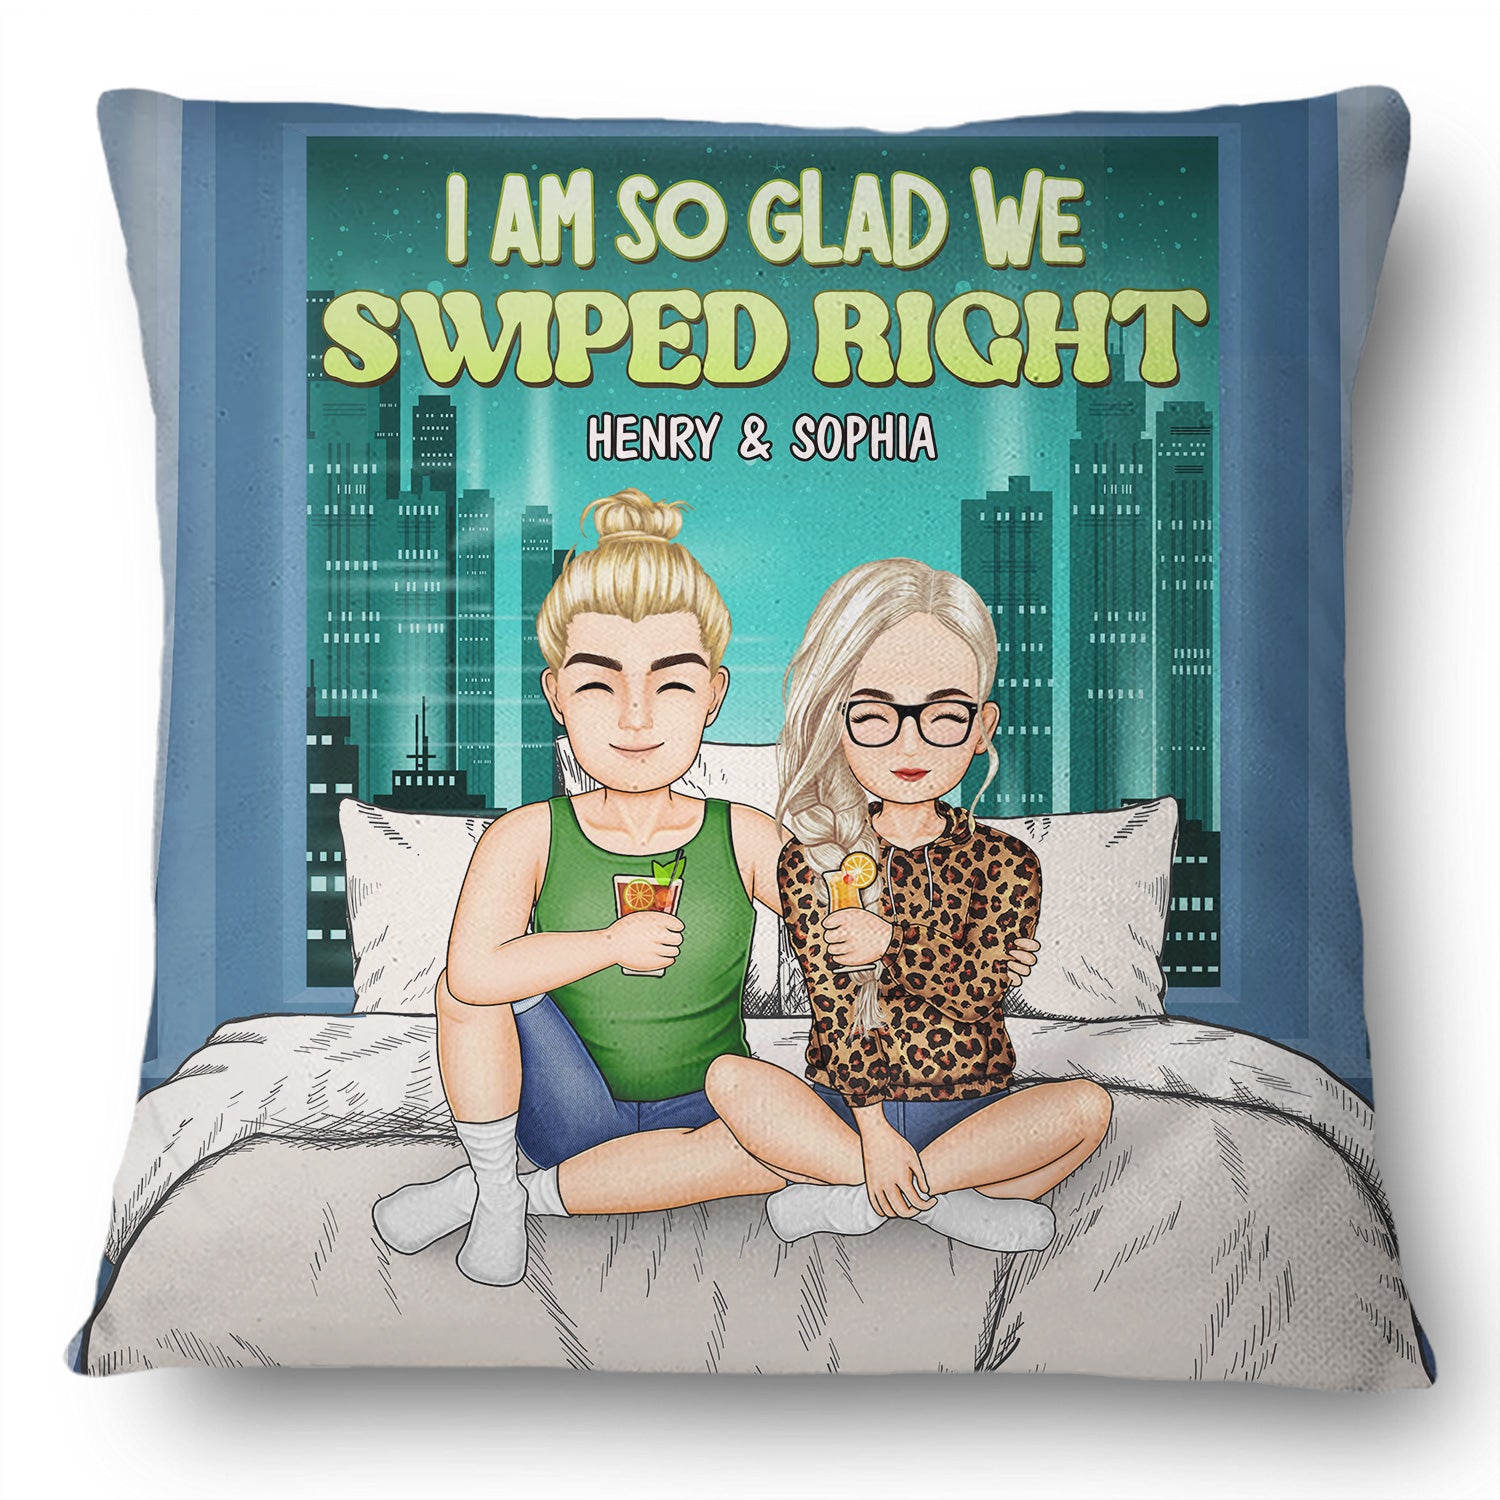 I'm Glad We Swiped Right - Gift For Couples - Personalized Pillow